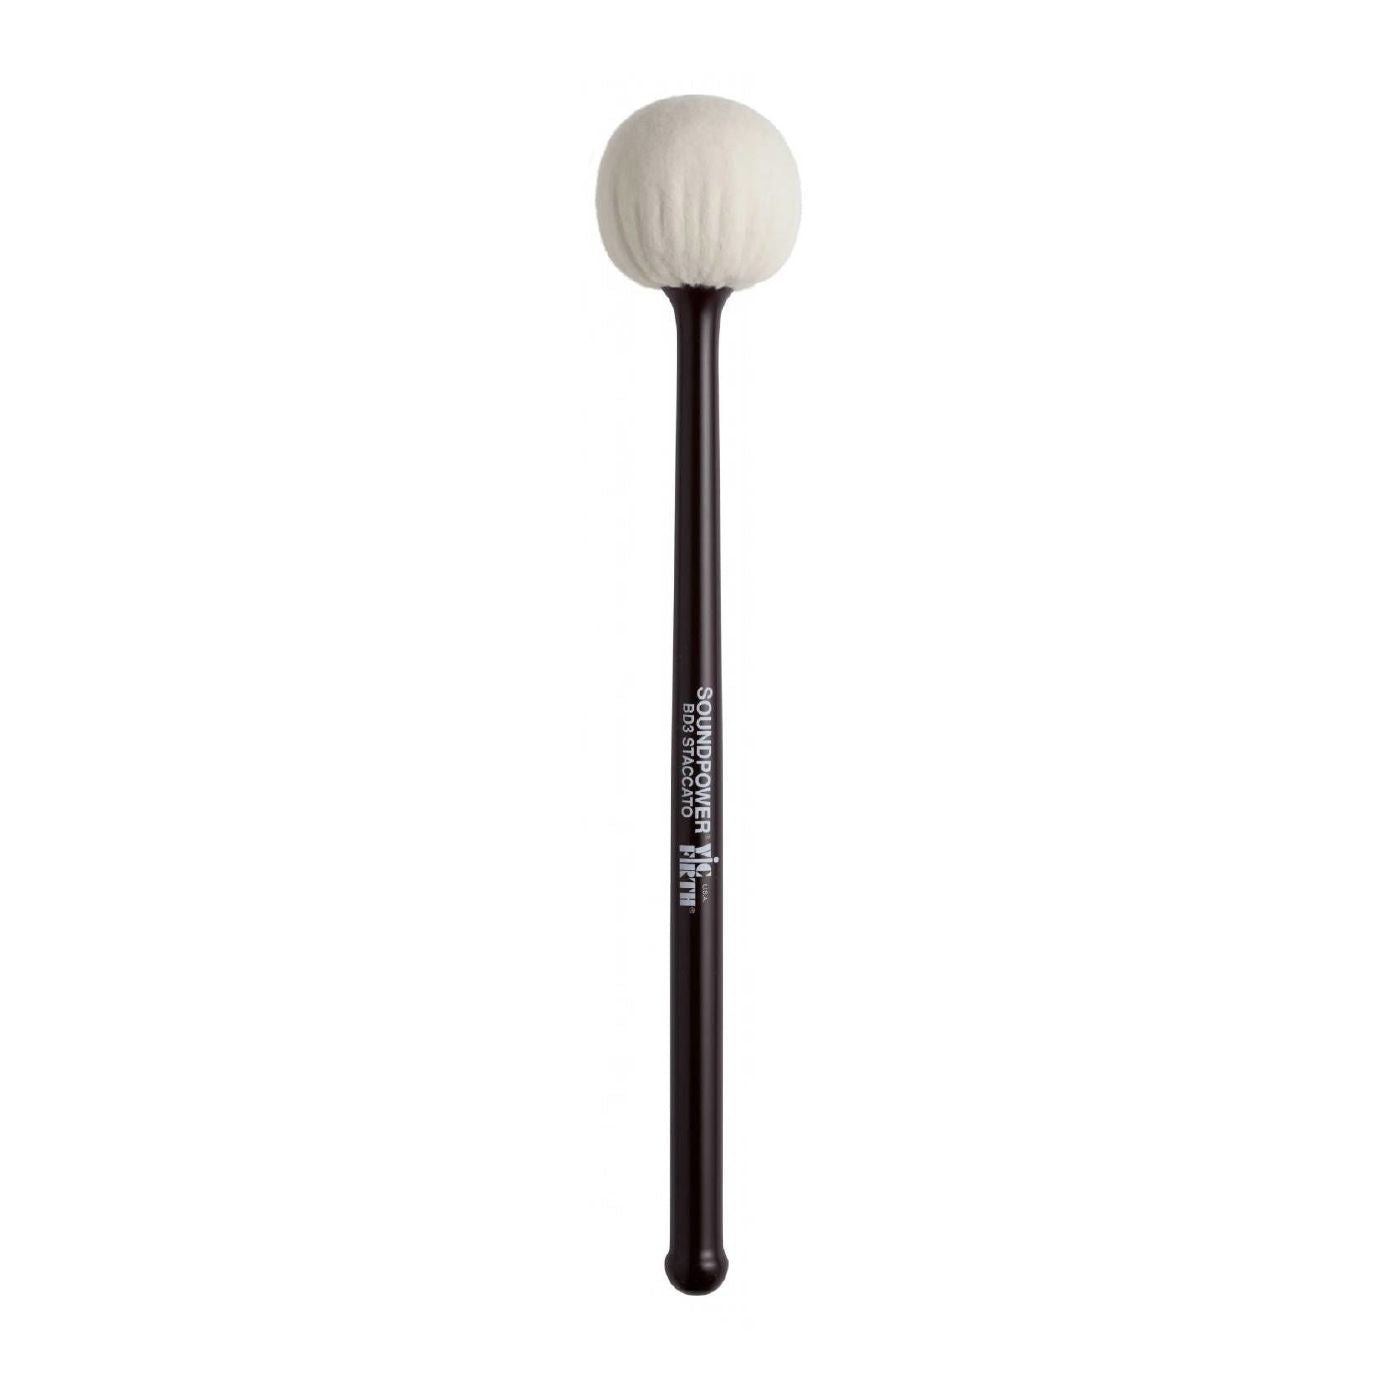 Vic Firth BD3 Soundpower Bass Drums Staccato Percussion Mallet Big Drum Stick for Marching and Concert Performances